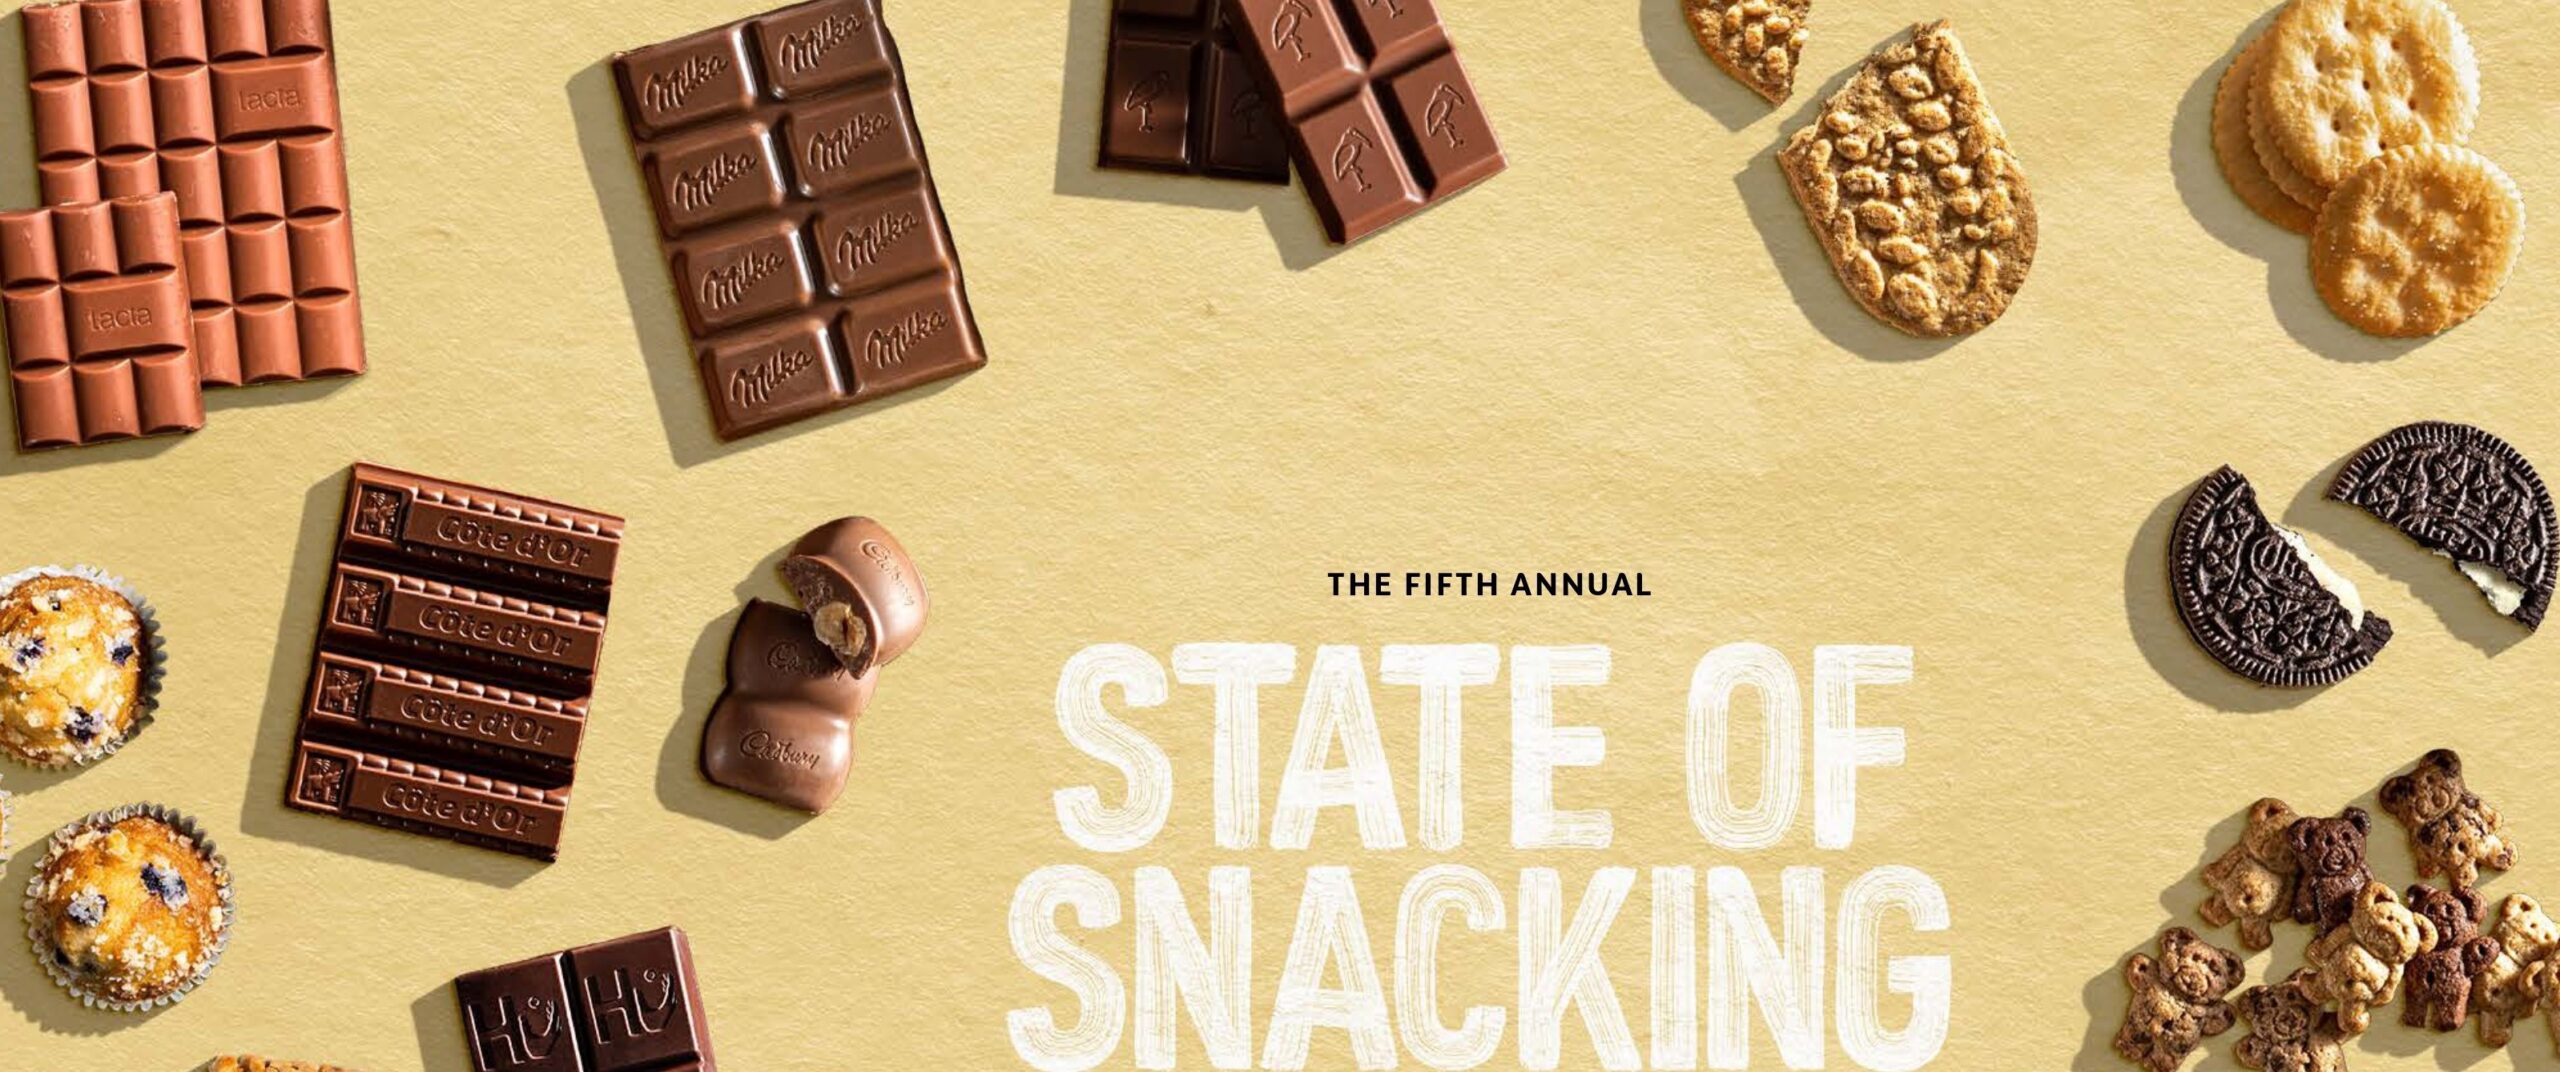 Global Consumers Continue to Prioritize Snacking